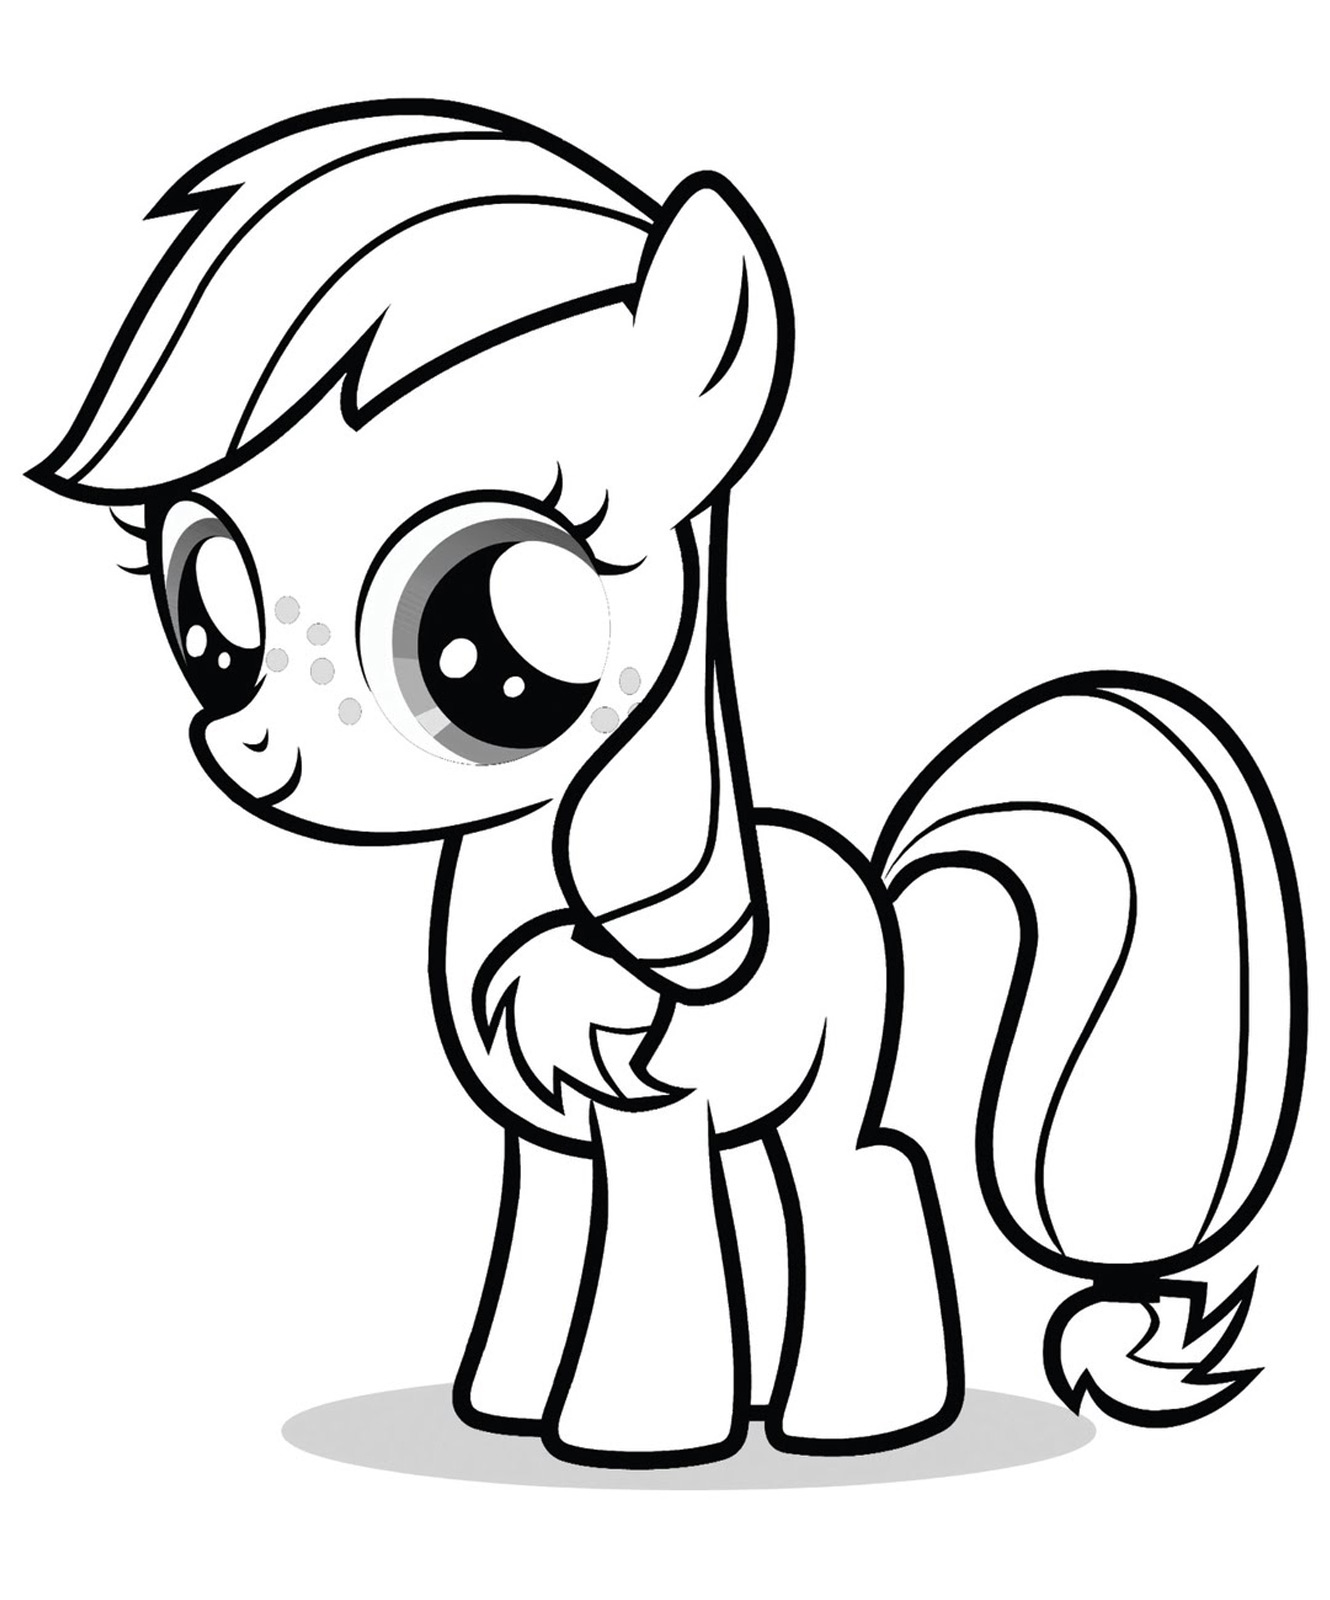 Little poney to color for children - Little Poney Kids Coloring Pages